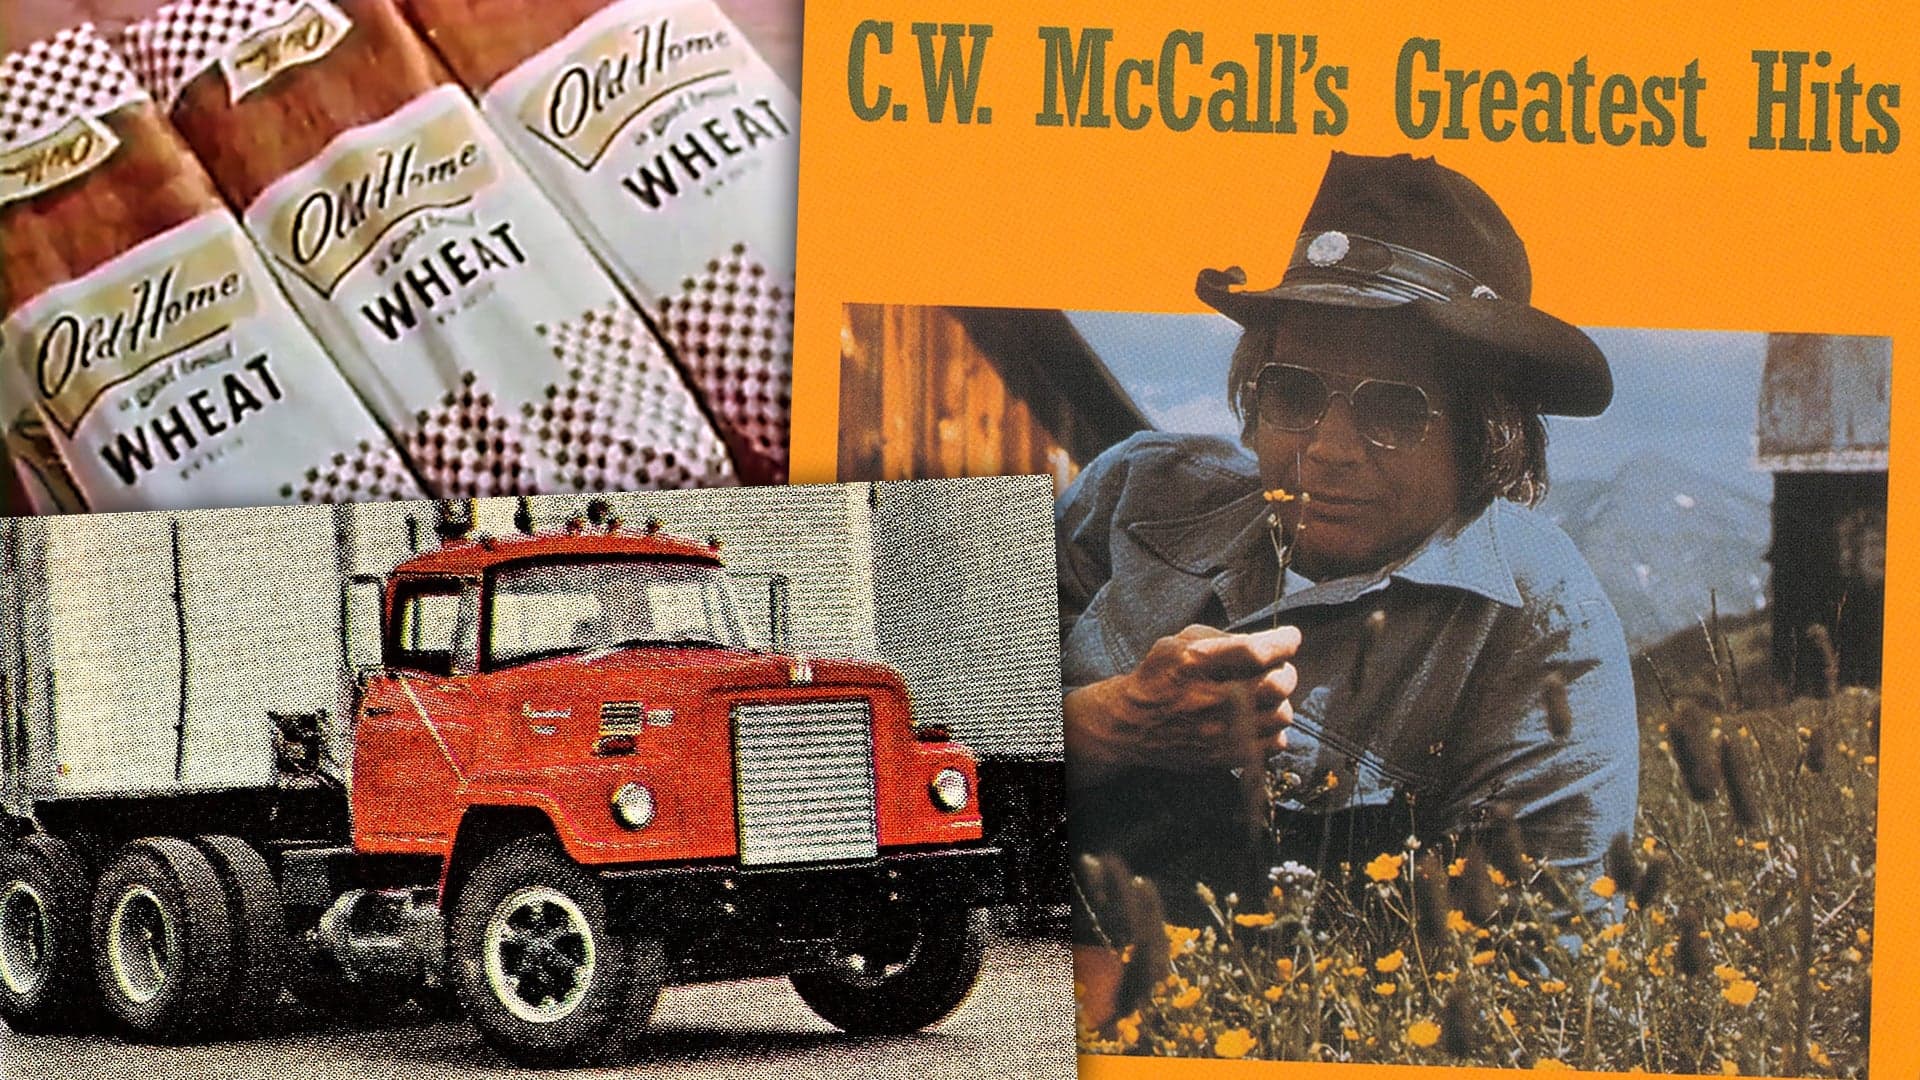 The 1970s Trucking Craze Can Be Traced Back to a Regional TV Commercial for Bread